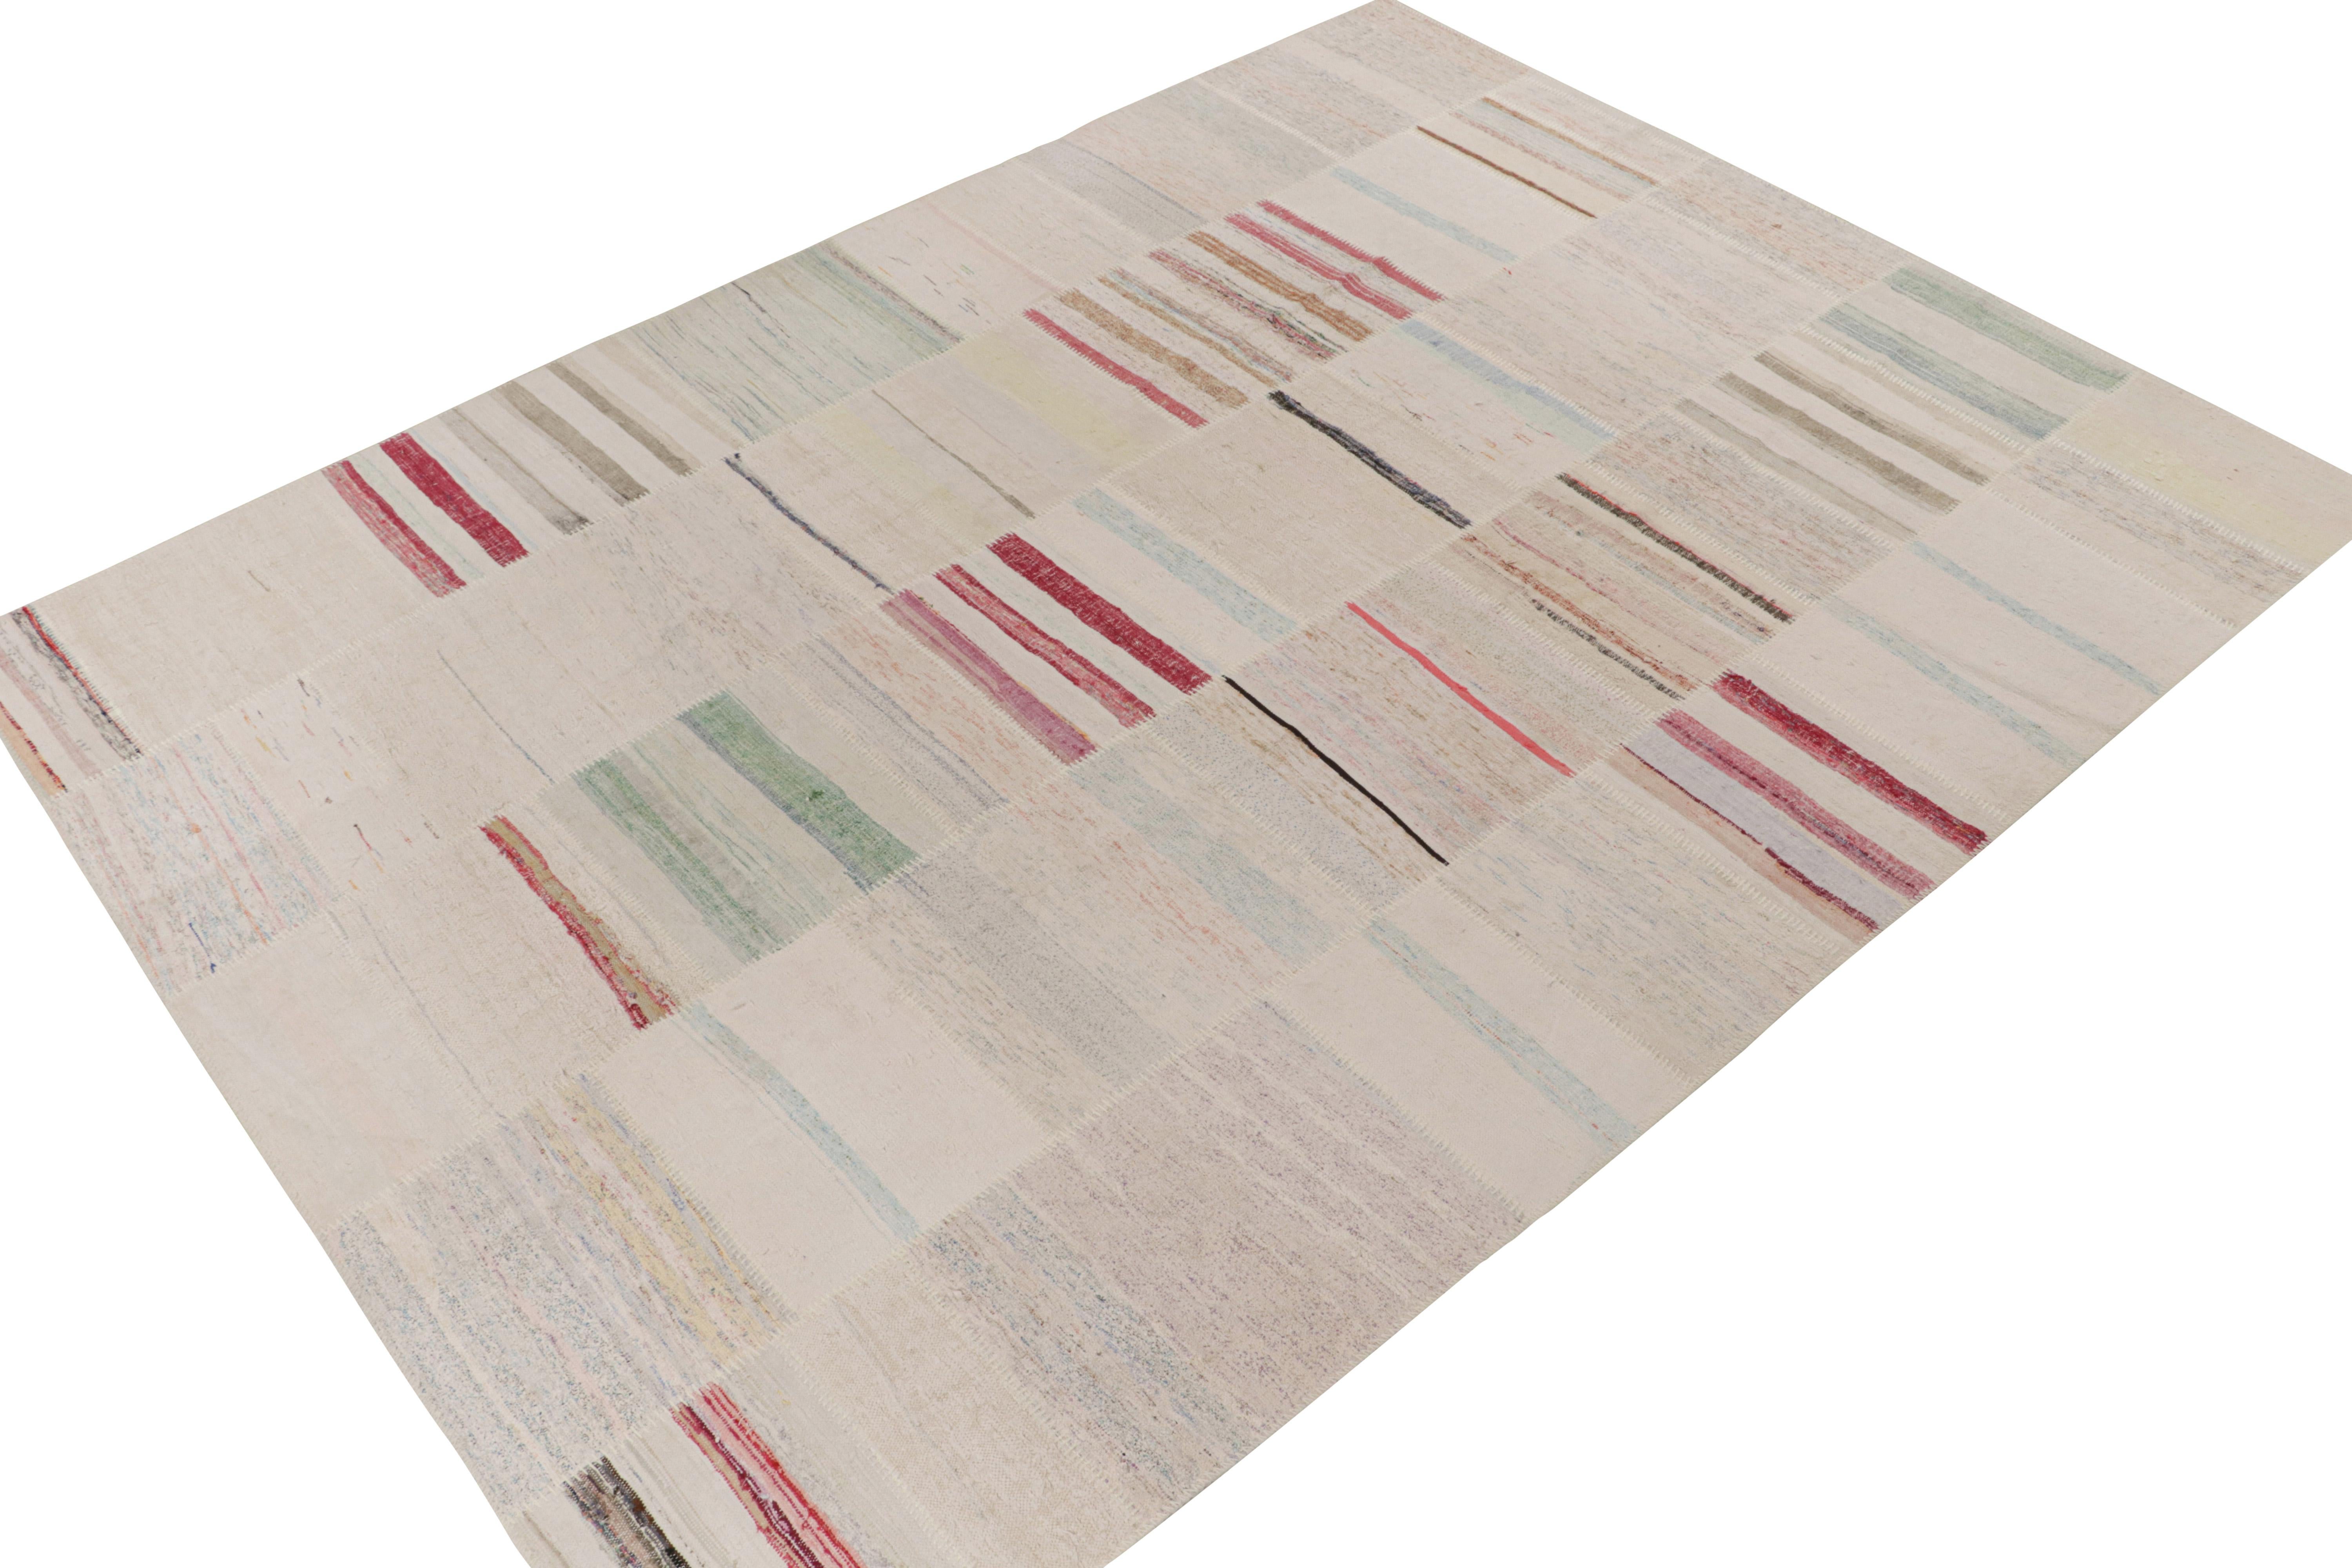 Rug & Kilim presents a contemporary 9x12 rug from their innovative new patchwork kilim collection. 

On the Design: 

This flat weave technique repurposes vintage yarns in polychromatic stripes and striae, achieving a playful look with fabulous